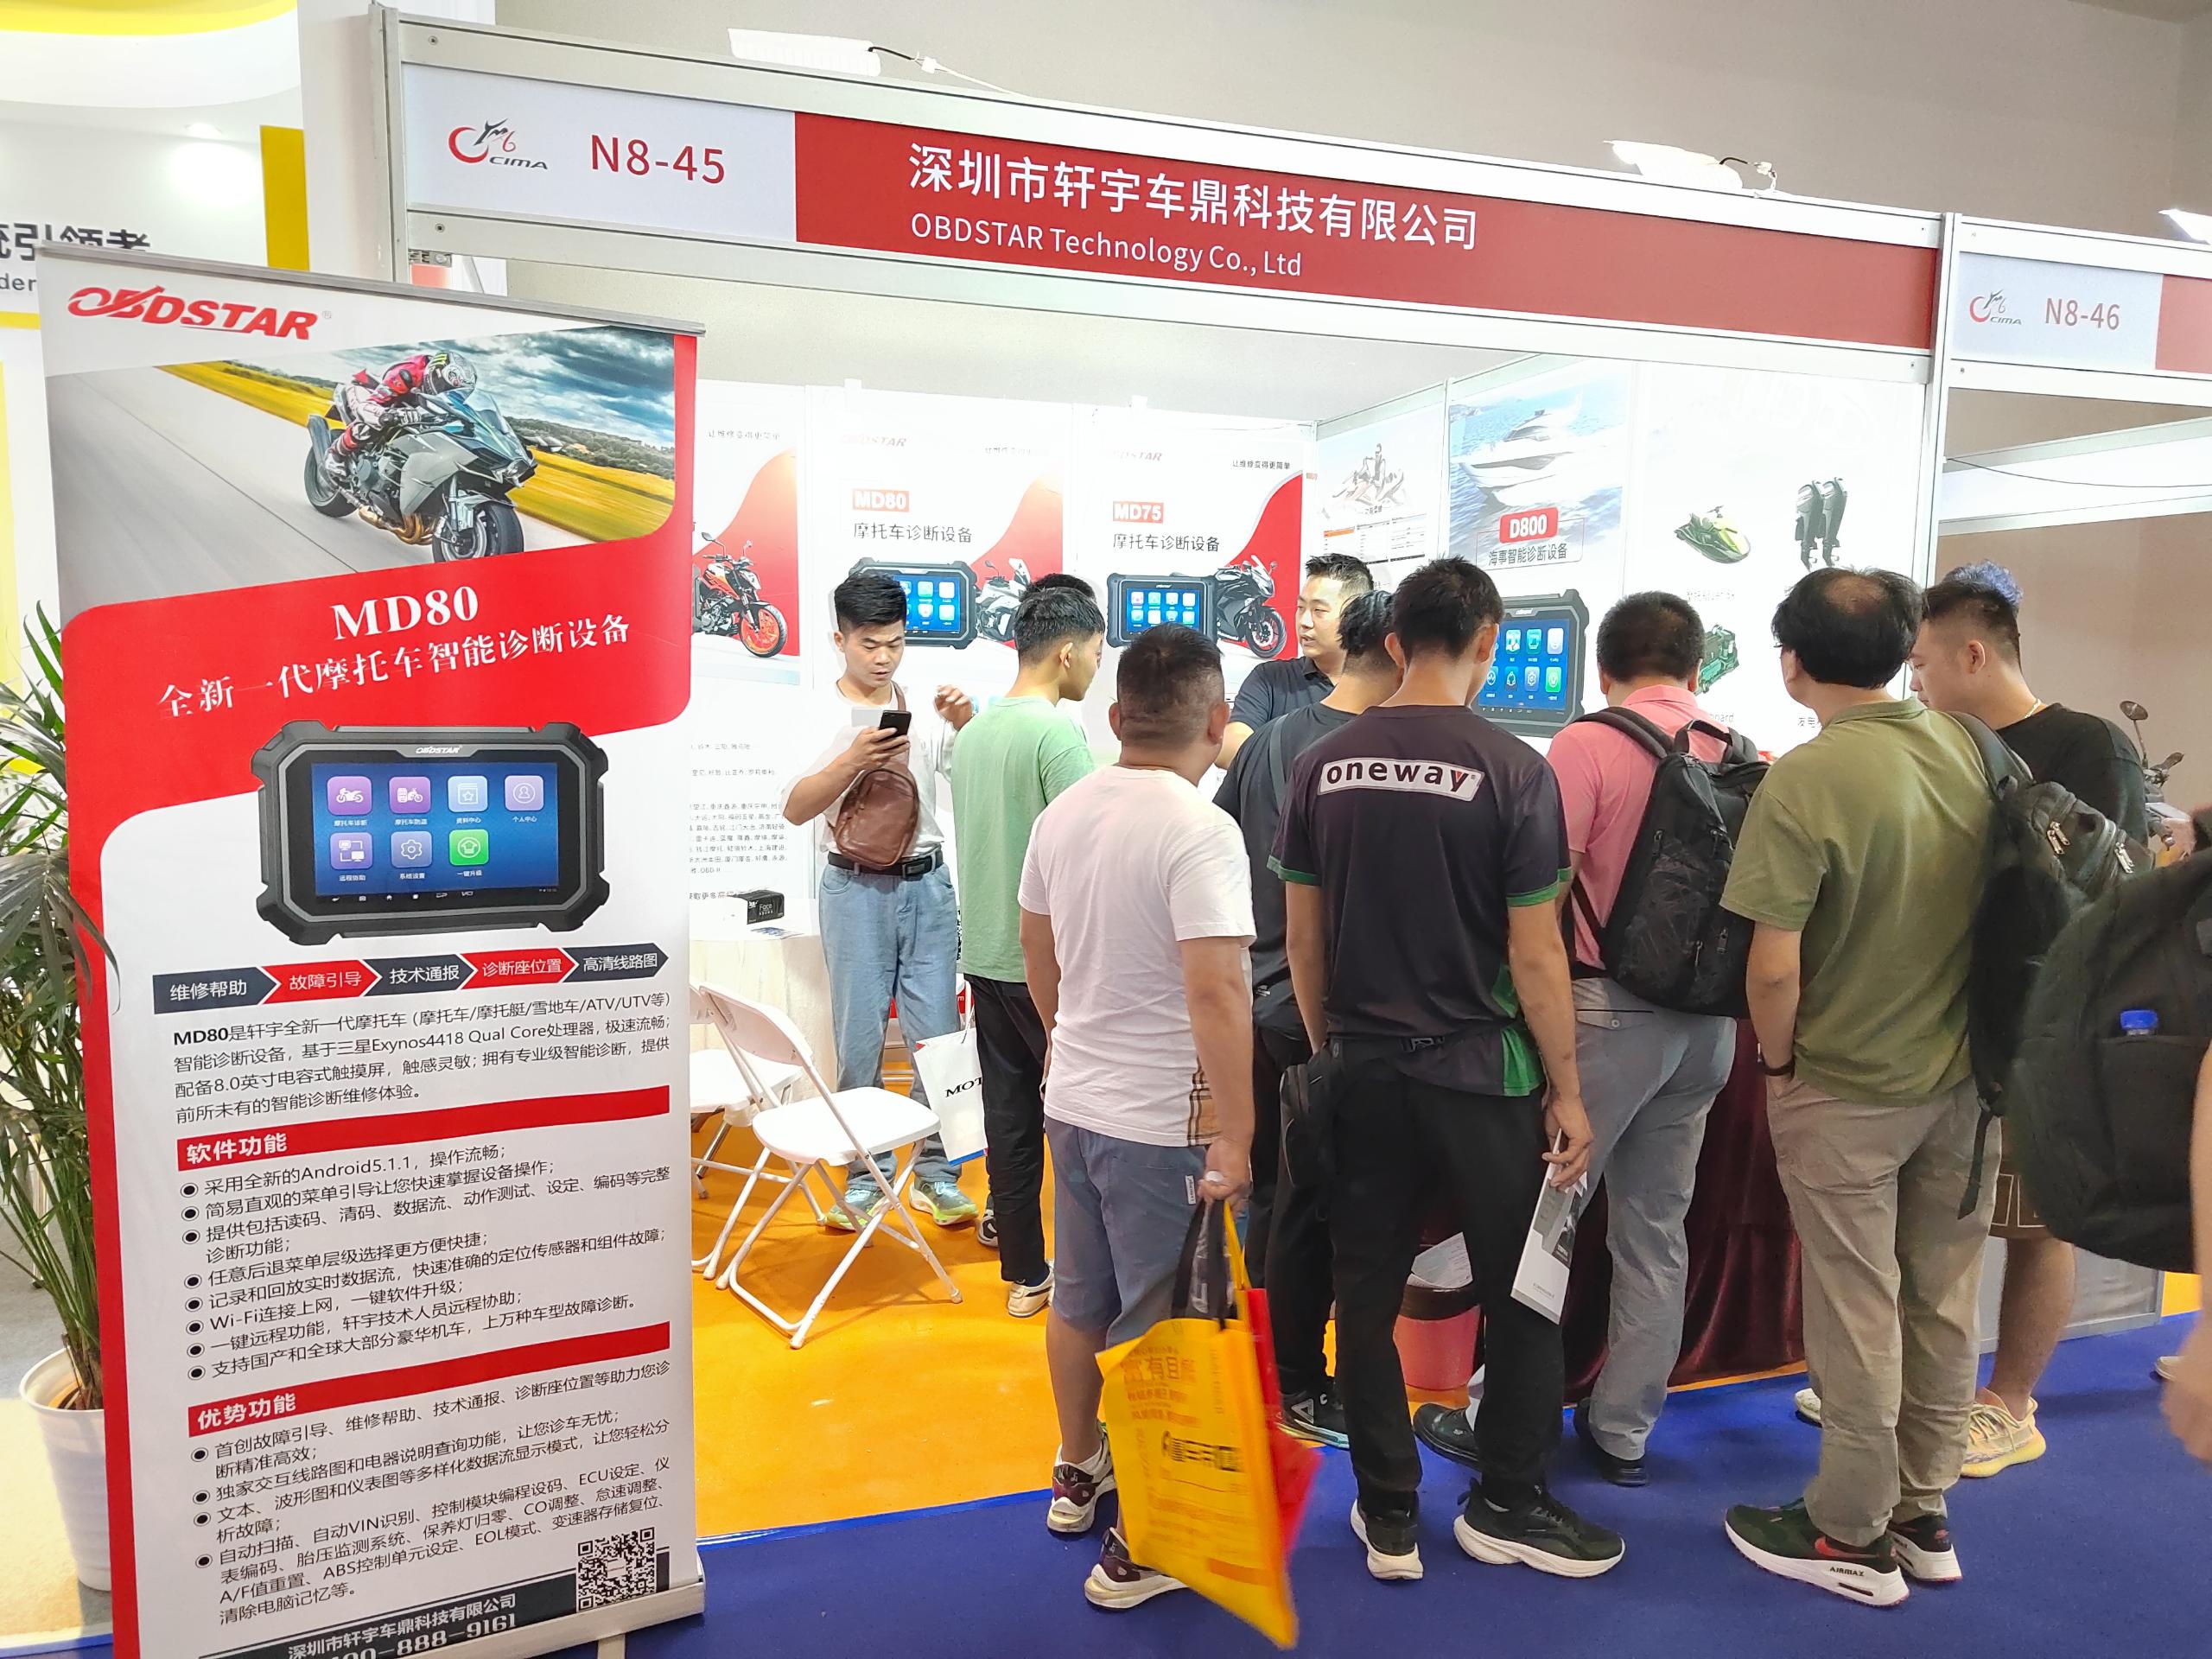 OBDSTAR at 21st China International Motorcycle Expo